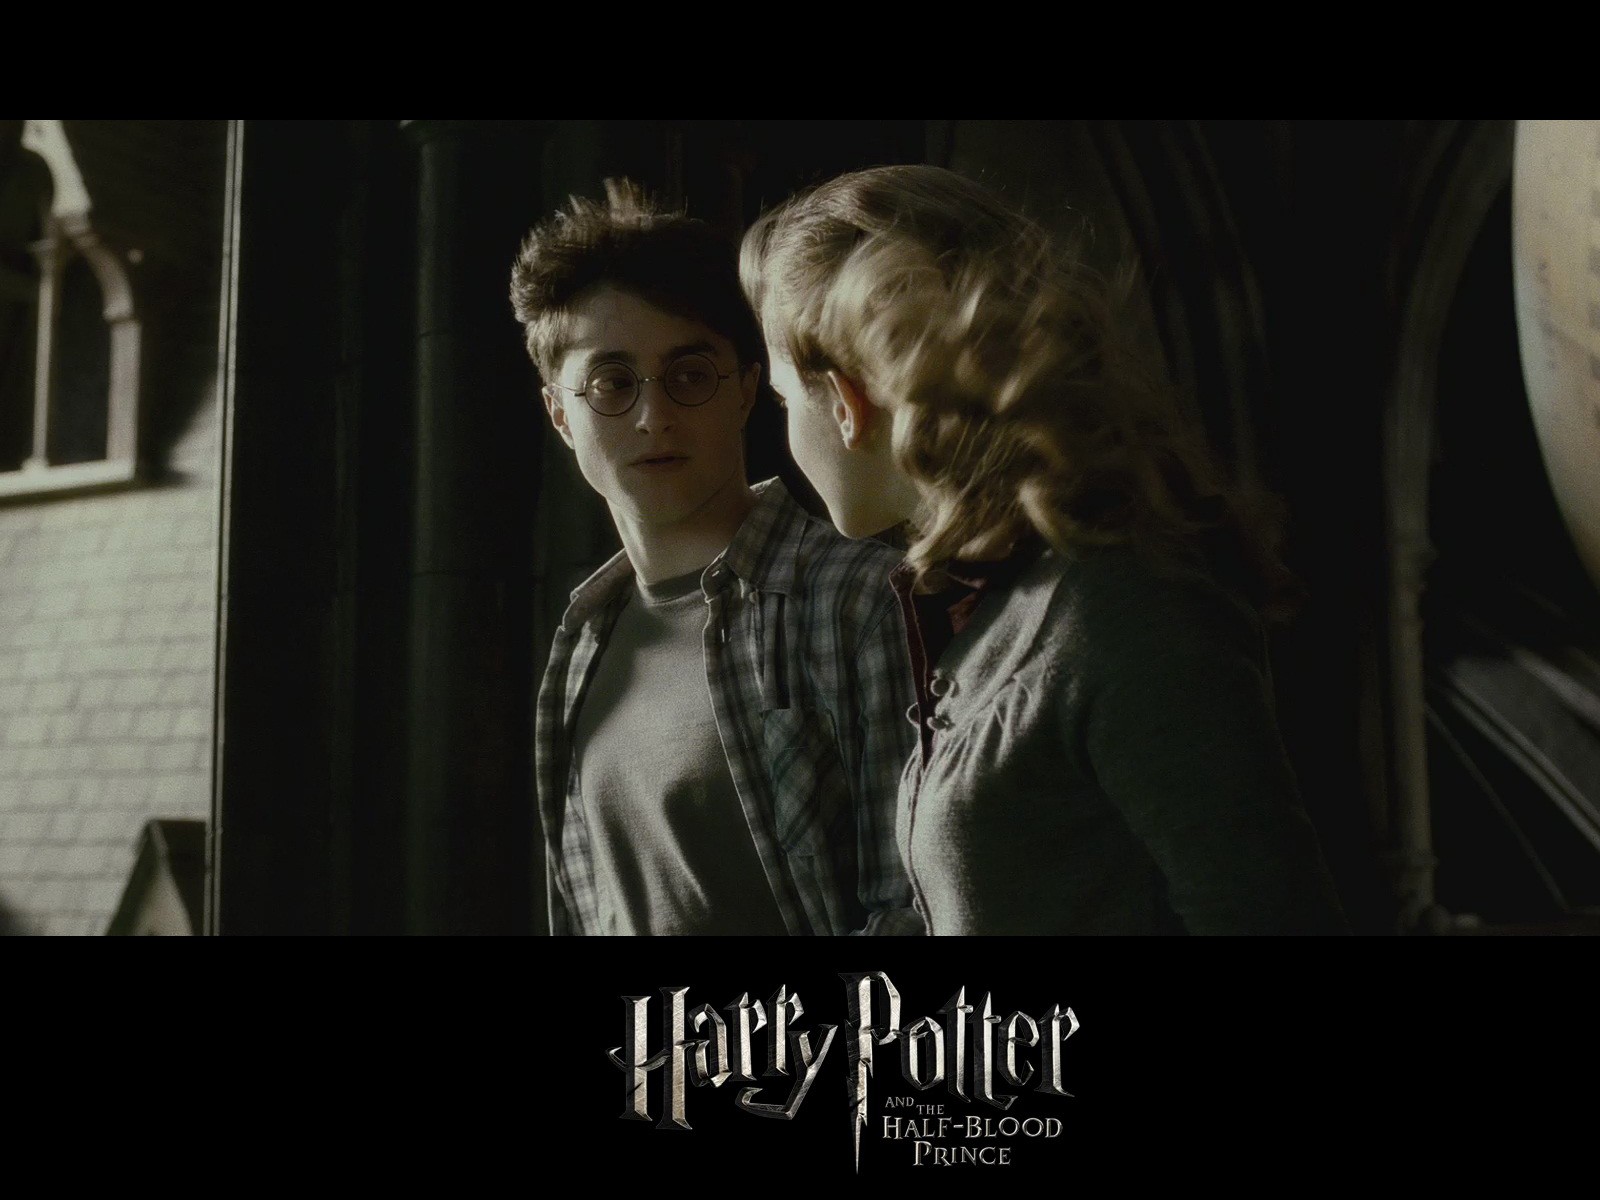 Harry Potter and the Half-Blood Prince Tapete #8 - 1600x1200